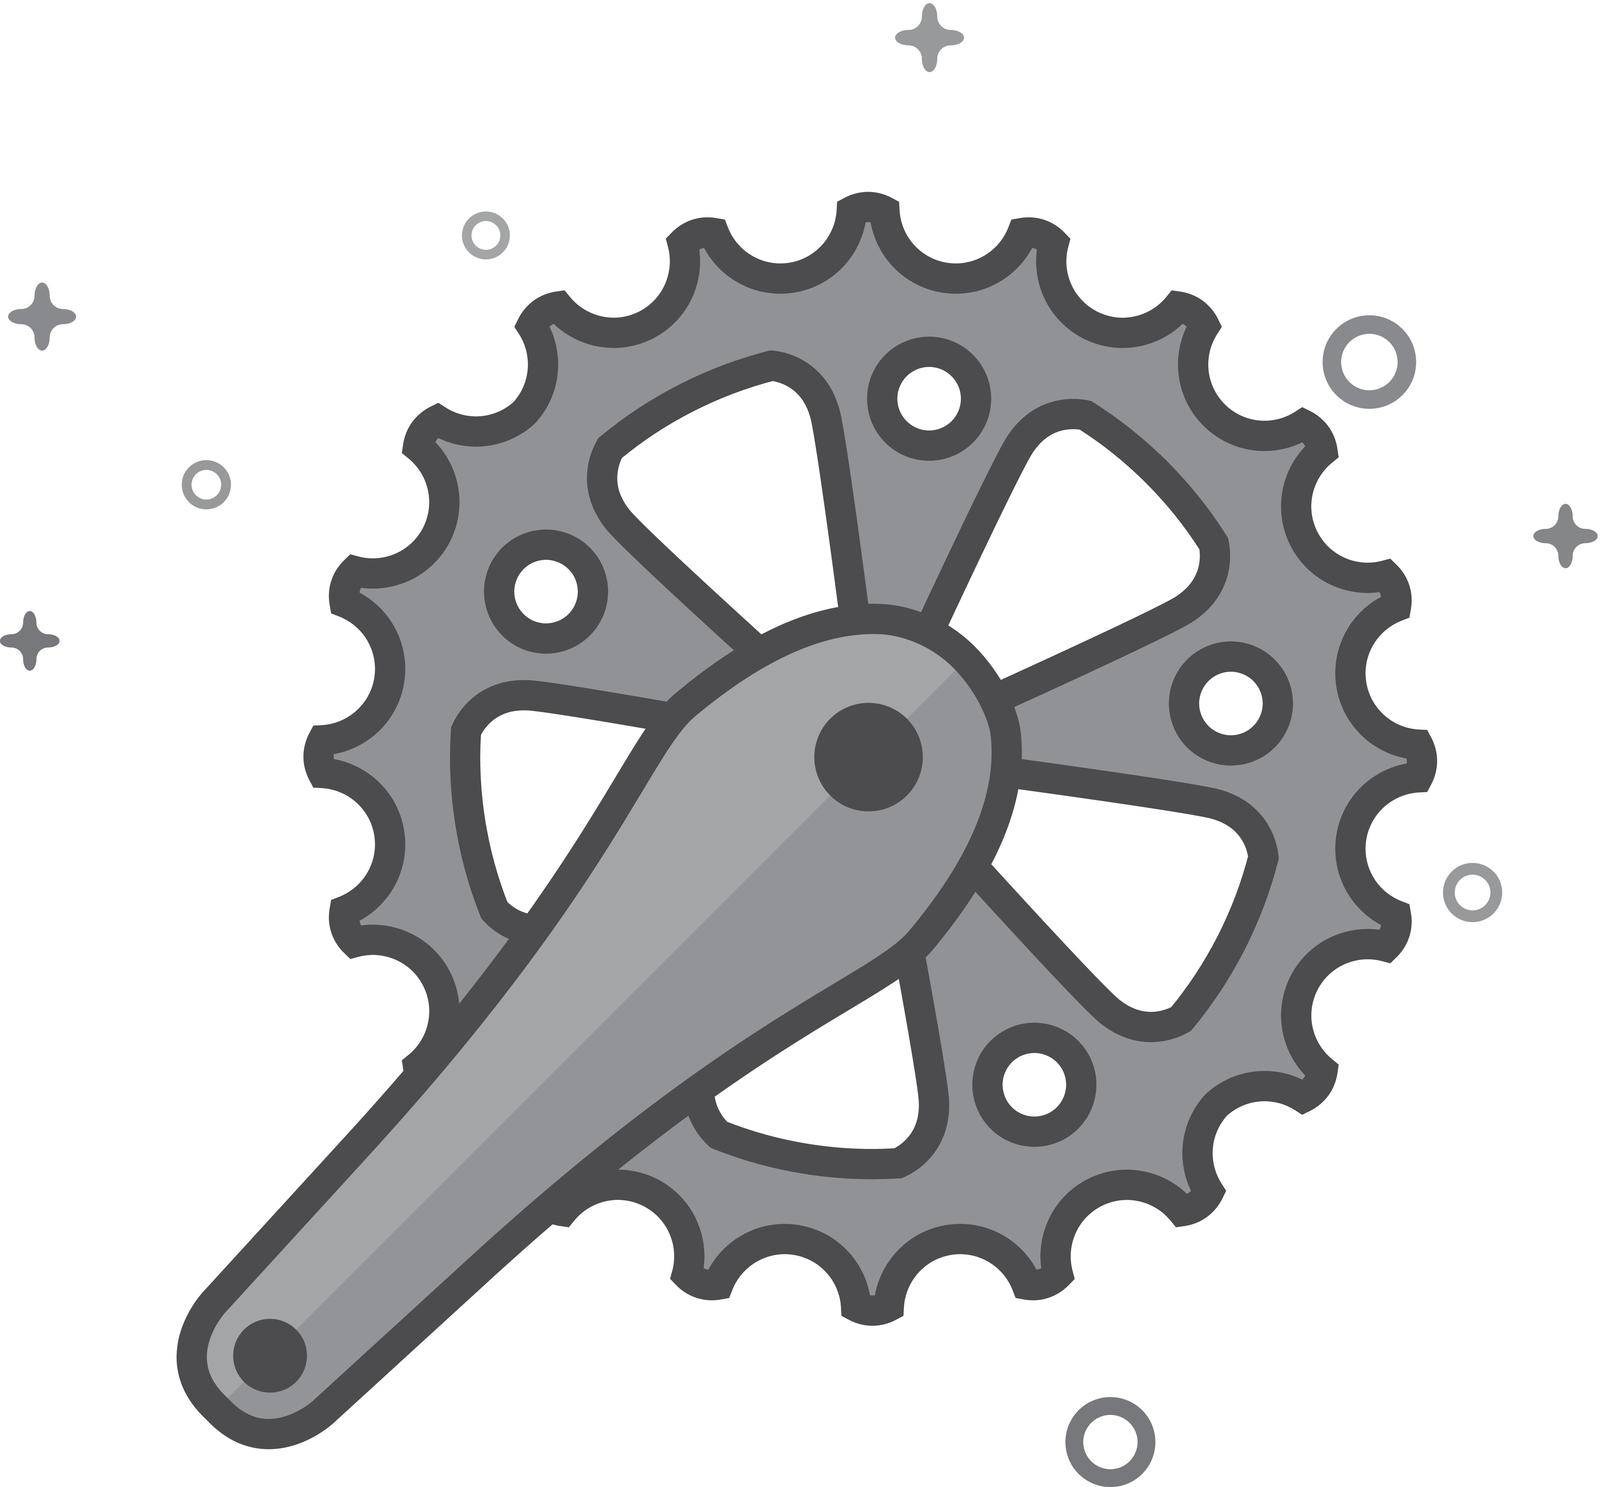 Bicycle crank set icon in flat outlined grayscale style. Vector illustration.